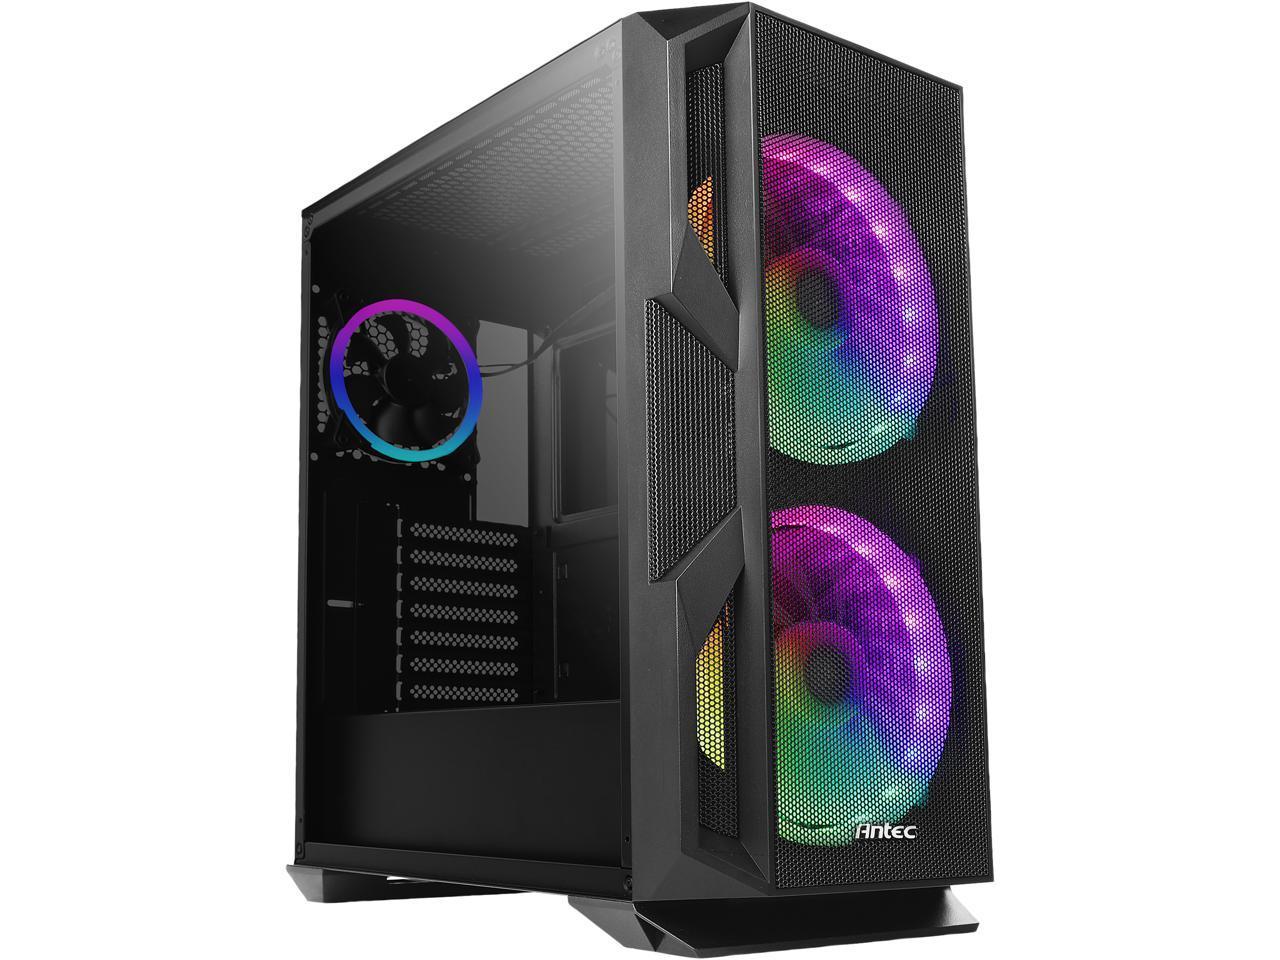 Antec NX800 Mid Tower E-ATX Tempered Glass Gaming Computer Case for $54.99 Shipped